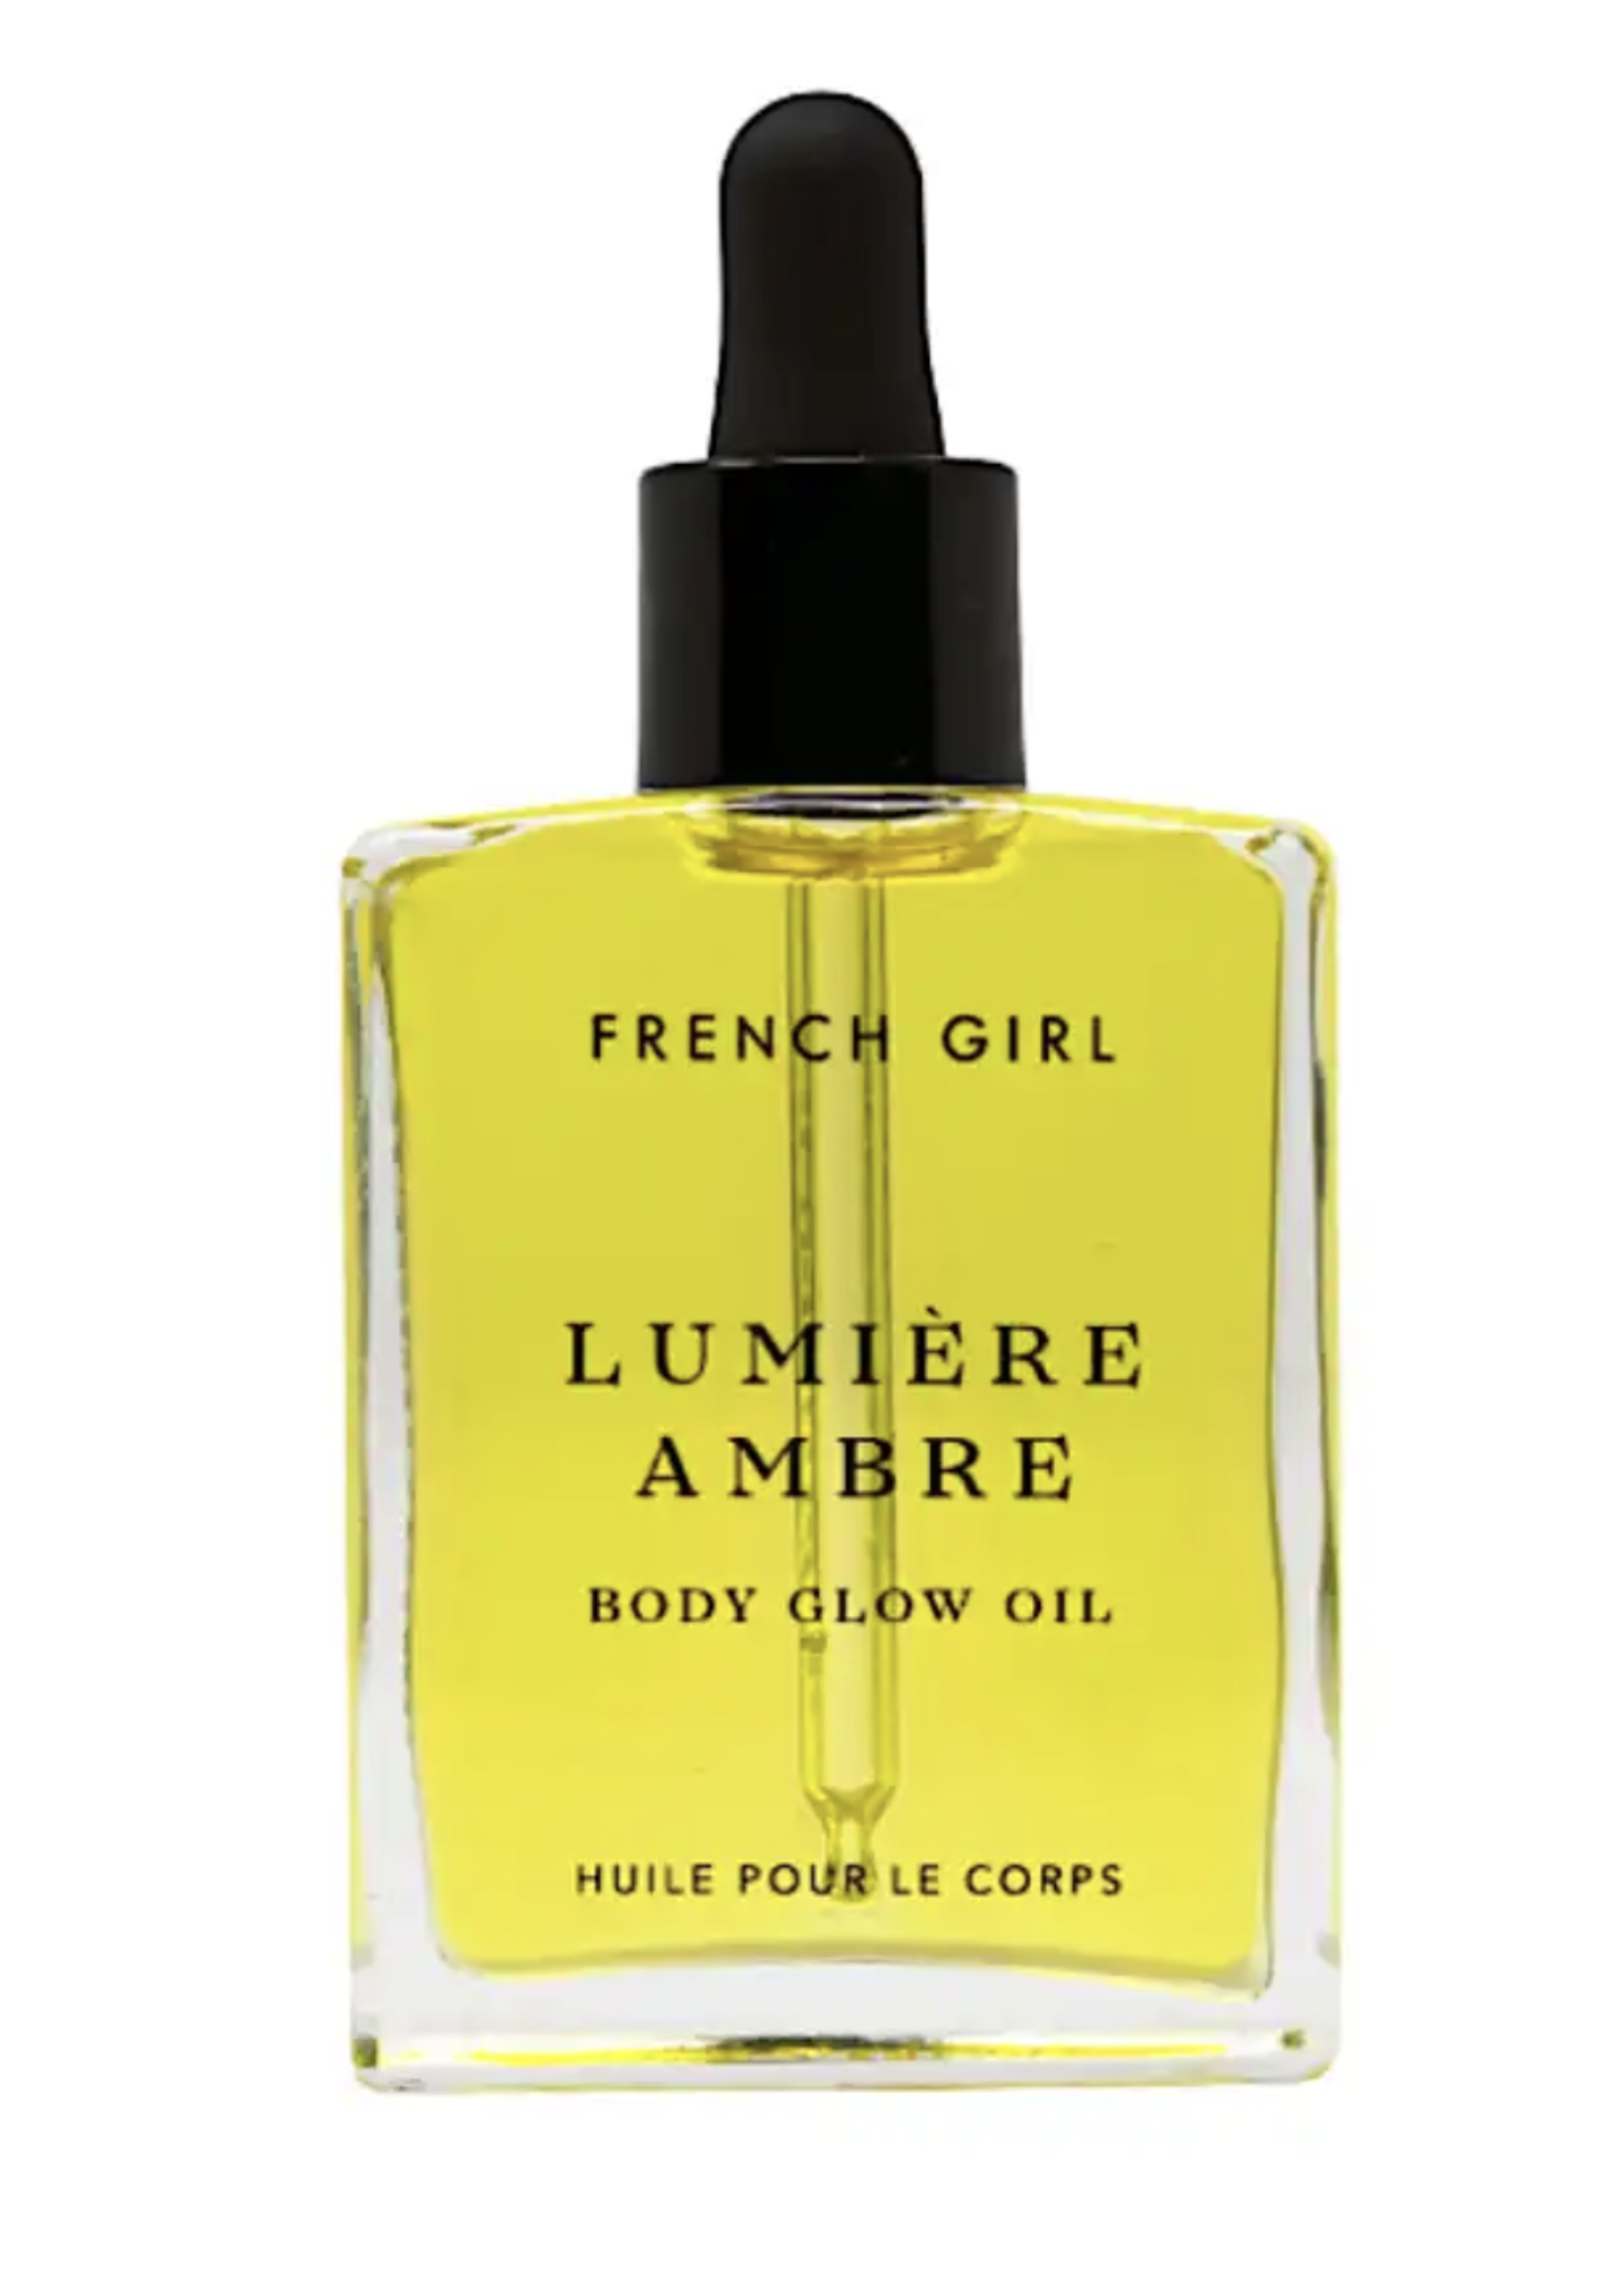 French Girl Lumiere Body Glow Oil Ambre